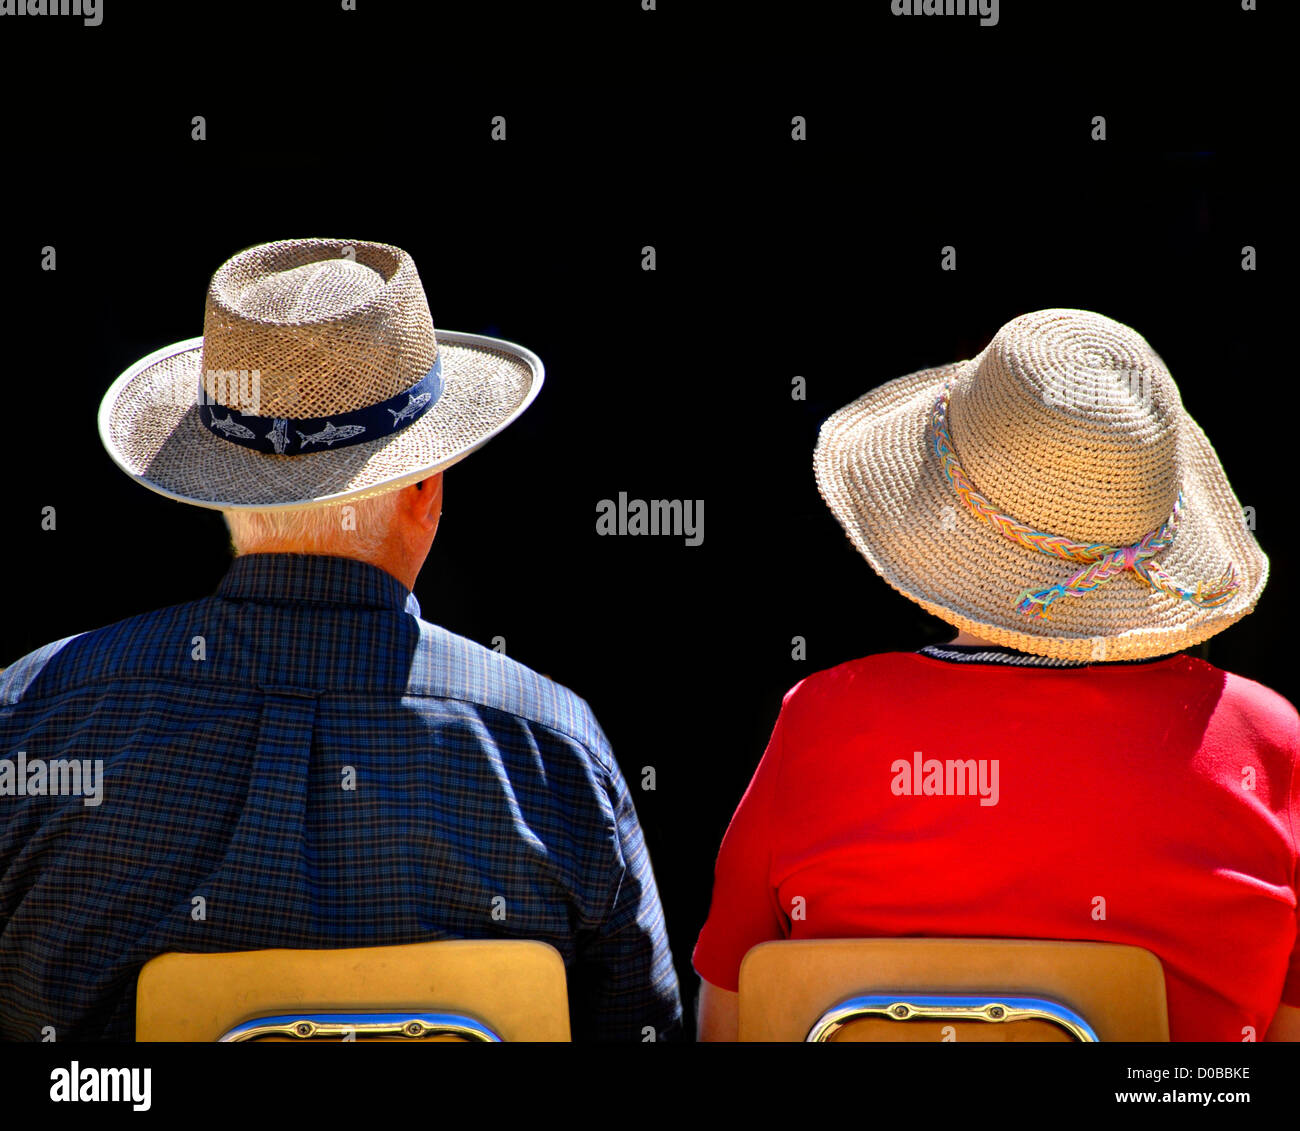 Old couple sitting in chairs wearing straw hats with black background Stock Photo